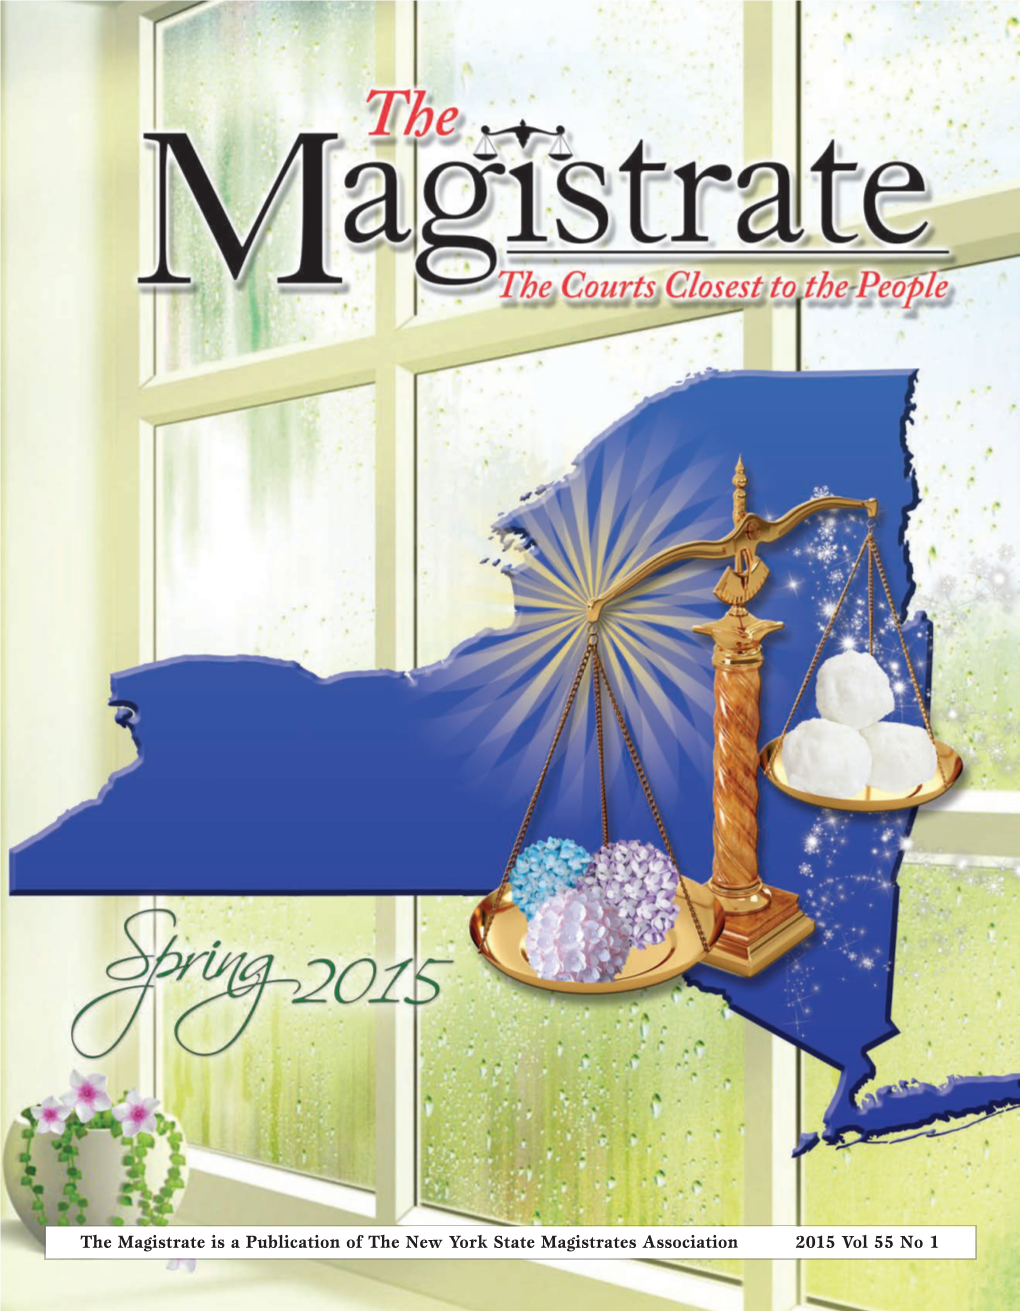 Spring 2015 - the Magistrate 3